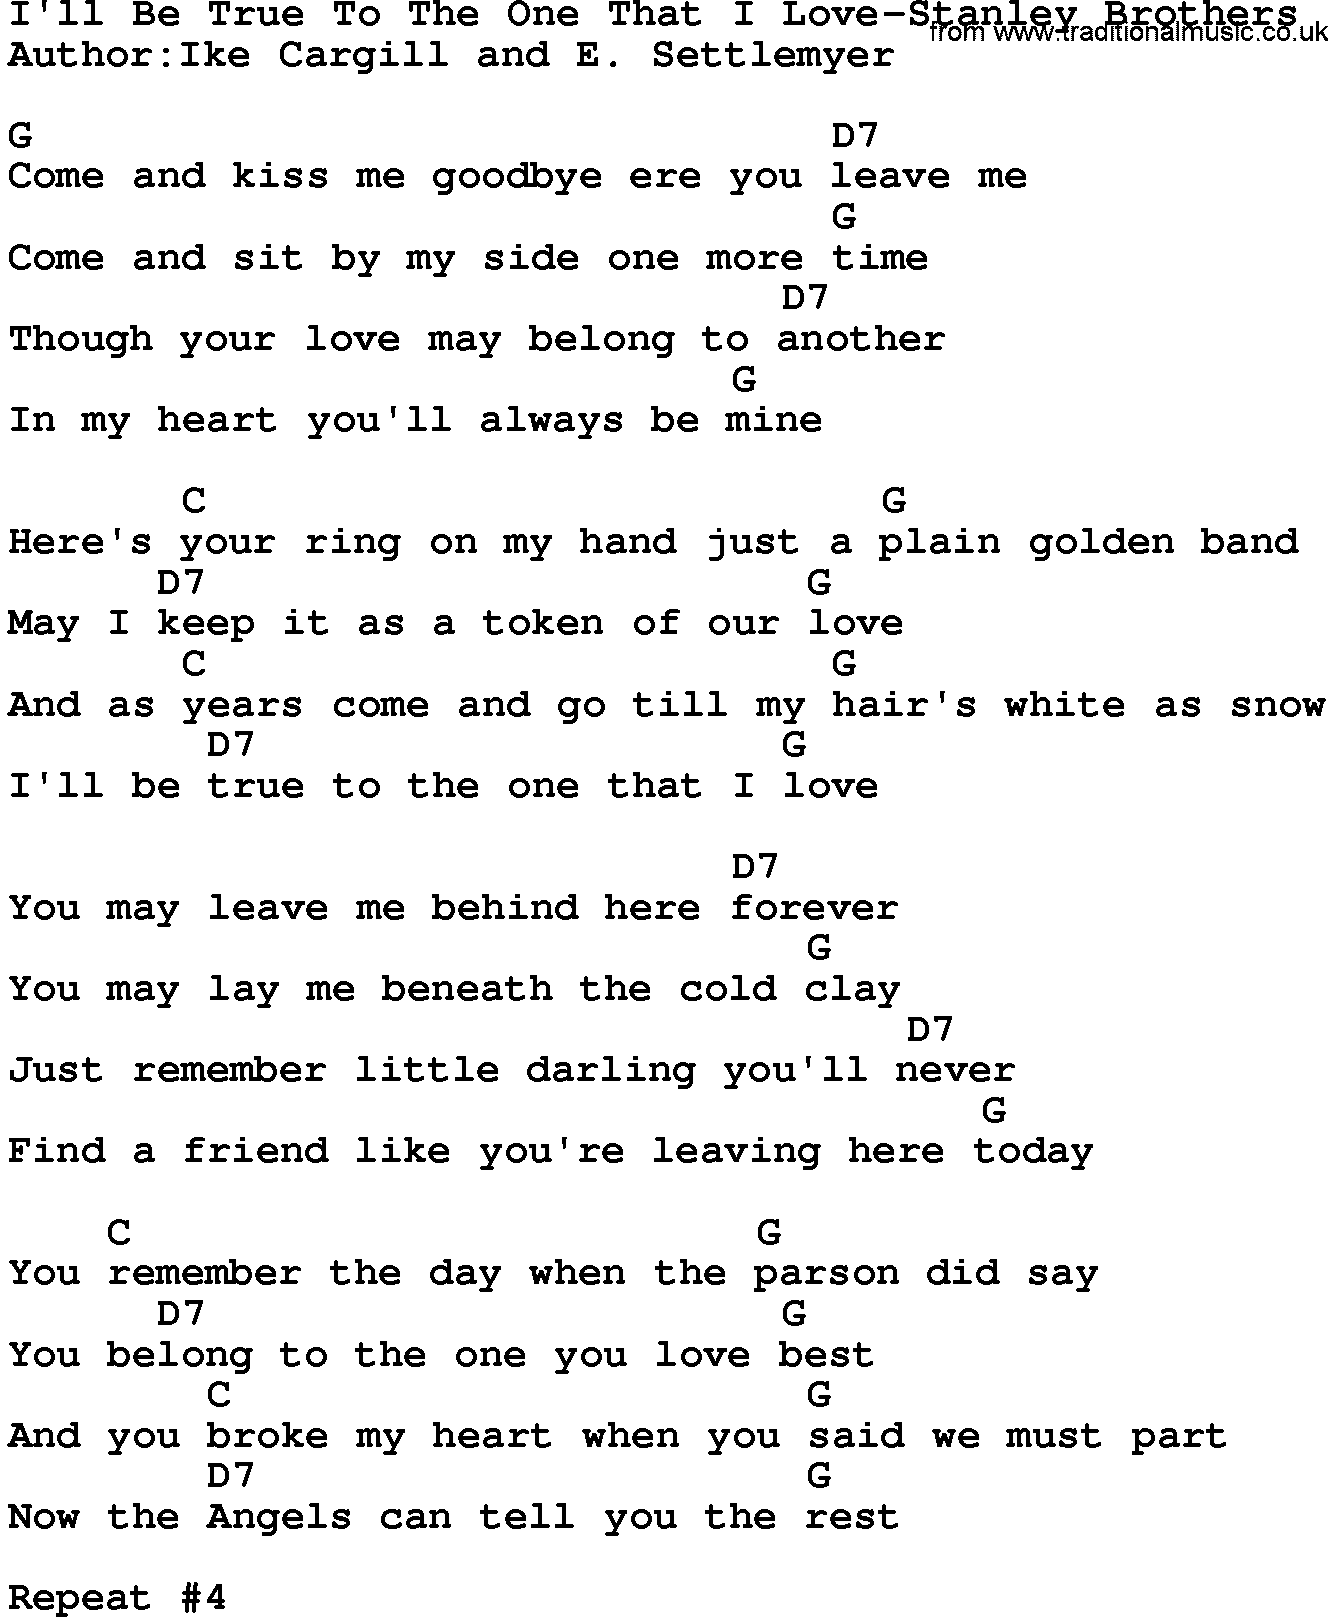 Country music song: I'll Be True To The One That I Love-Stanley Brothers lyrics and chords